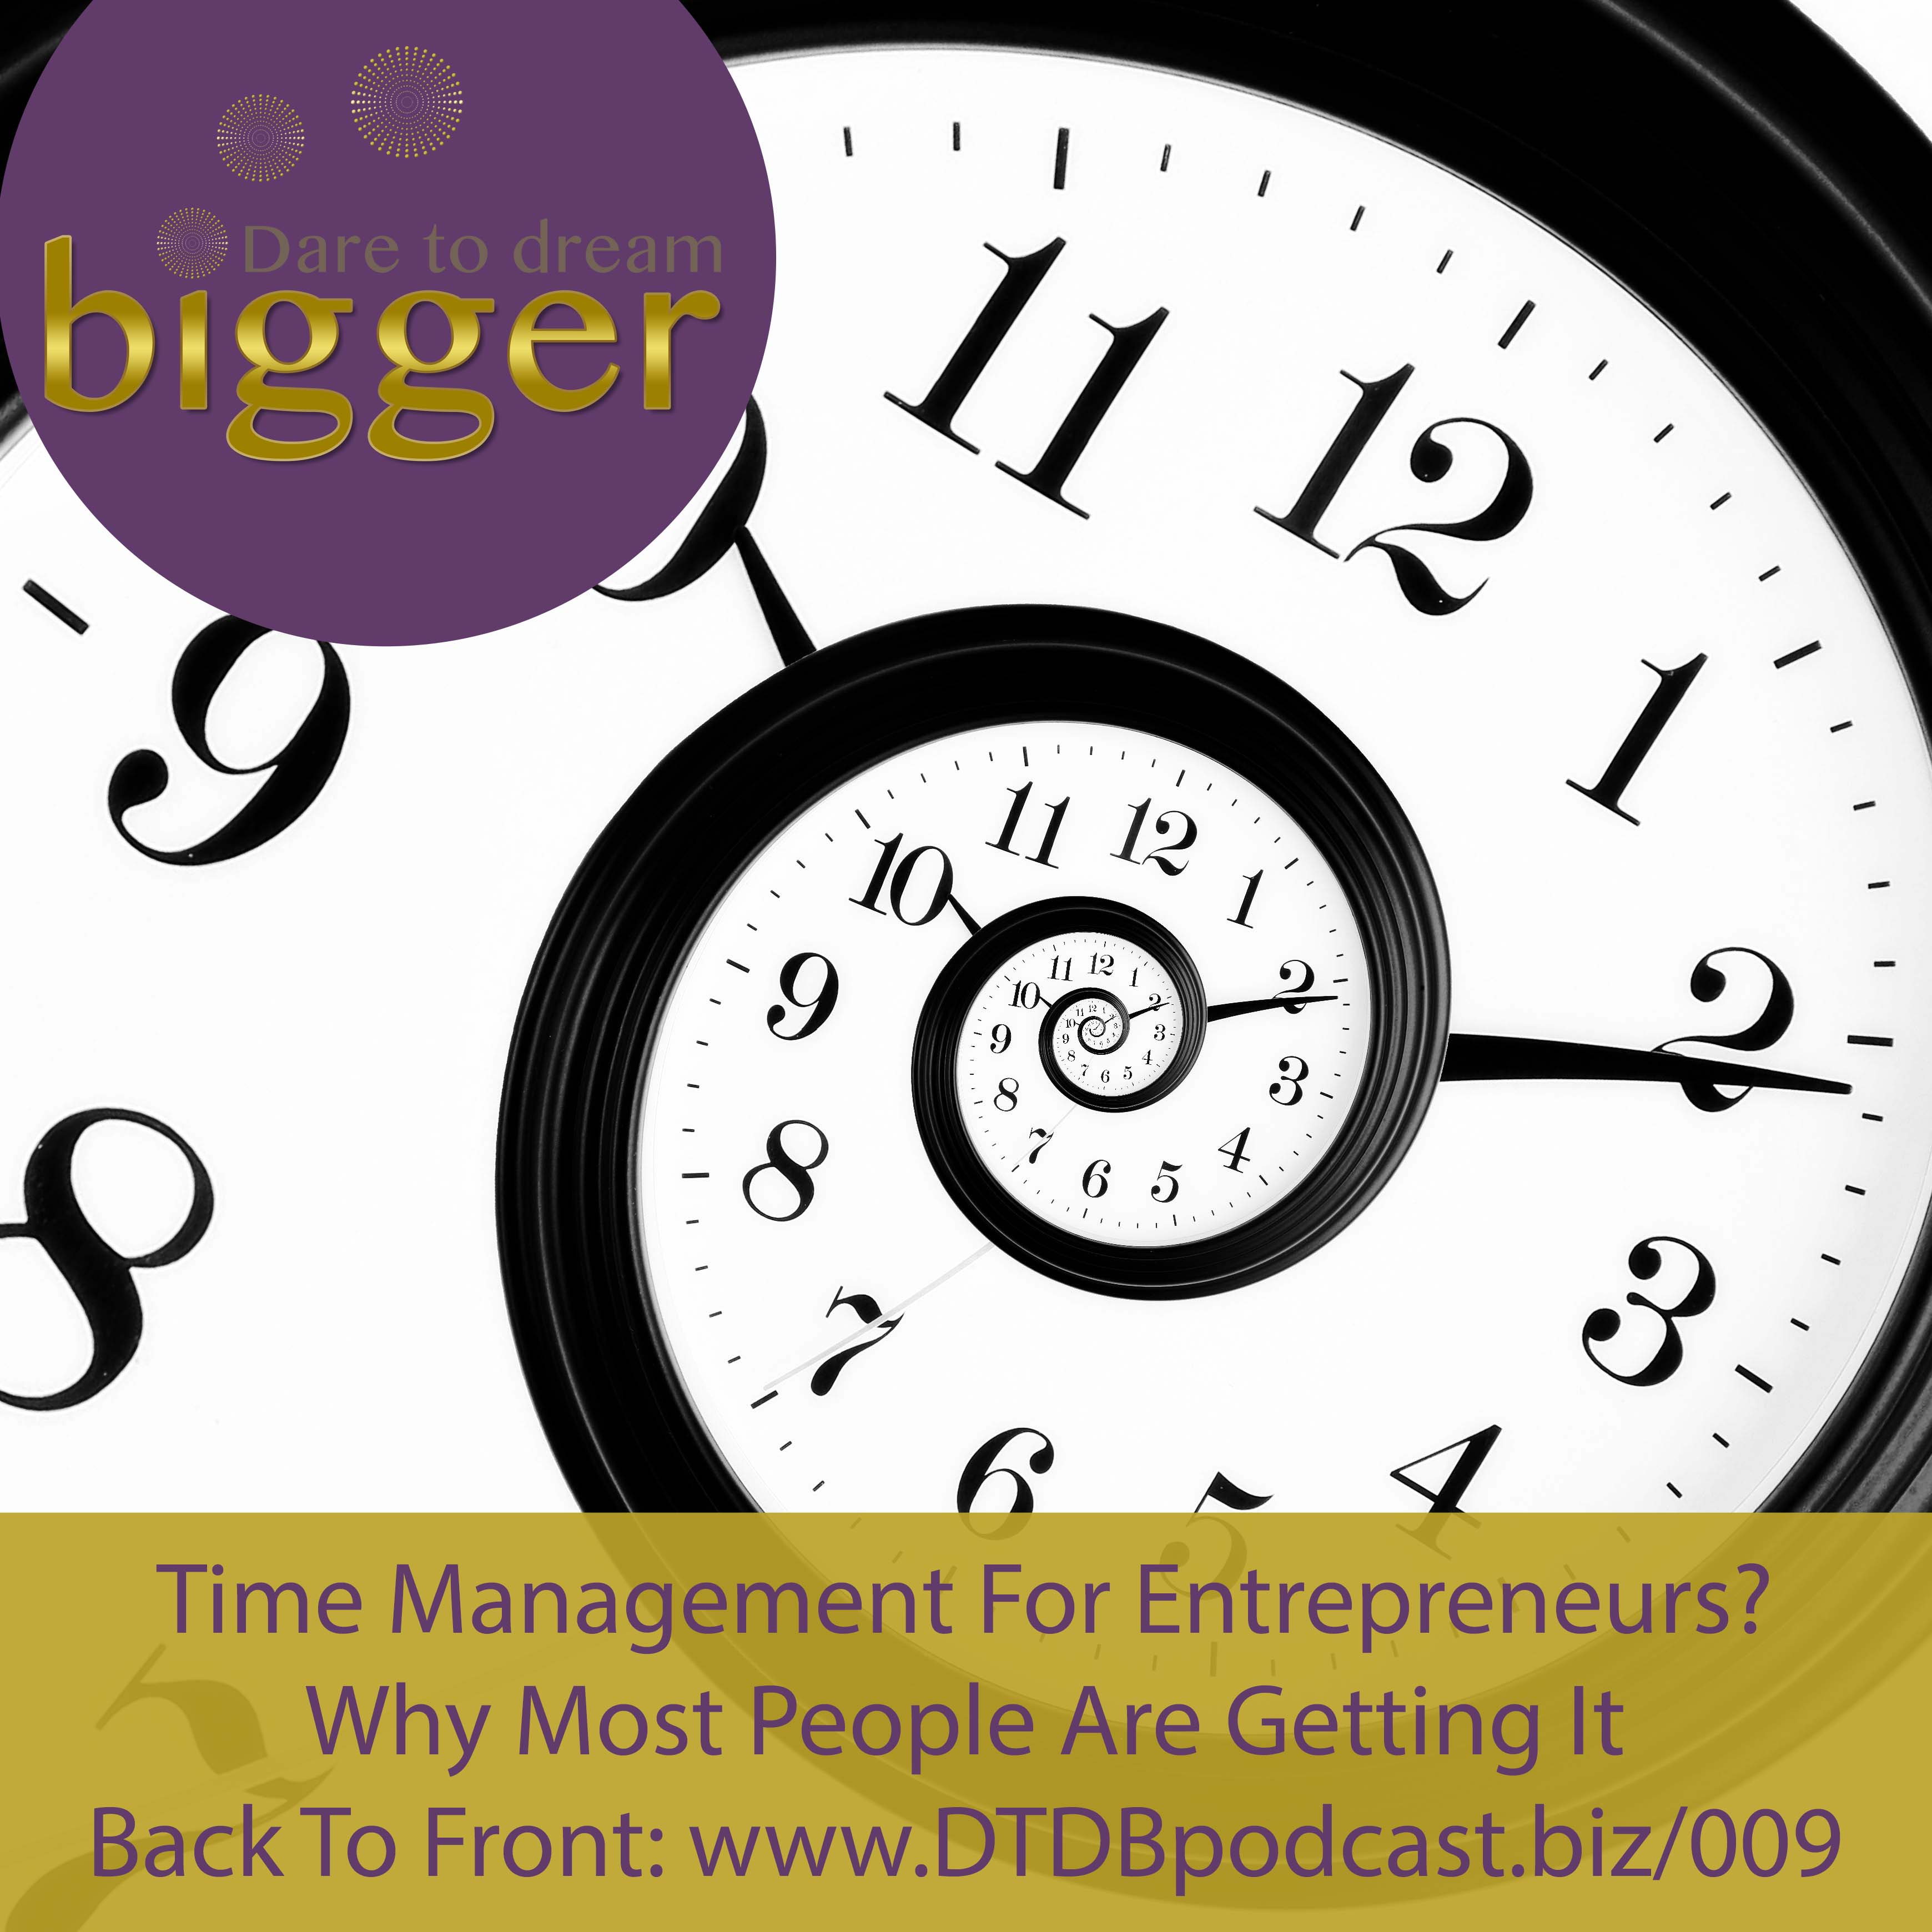 Time Management For Entrepreneurs? Why Most People Are Getting It Back To Front: http://www.dtdbpodcast.biz/009